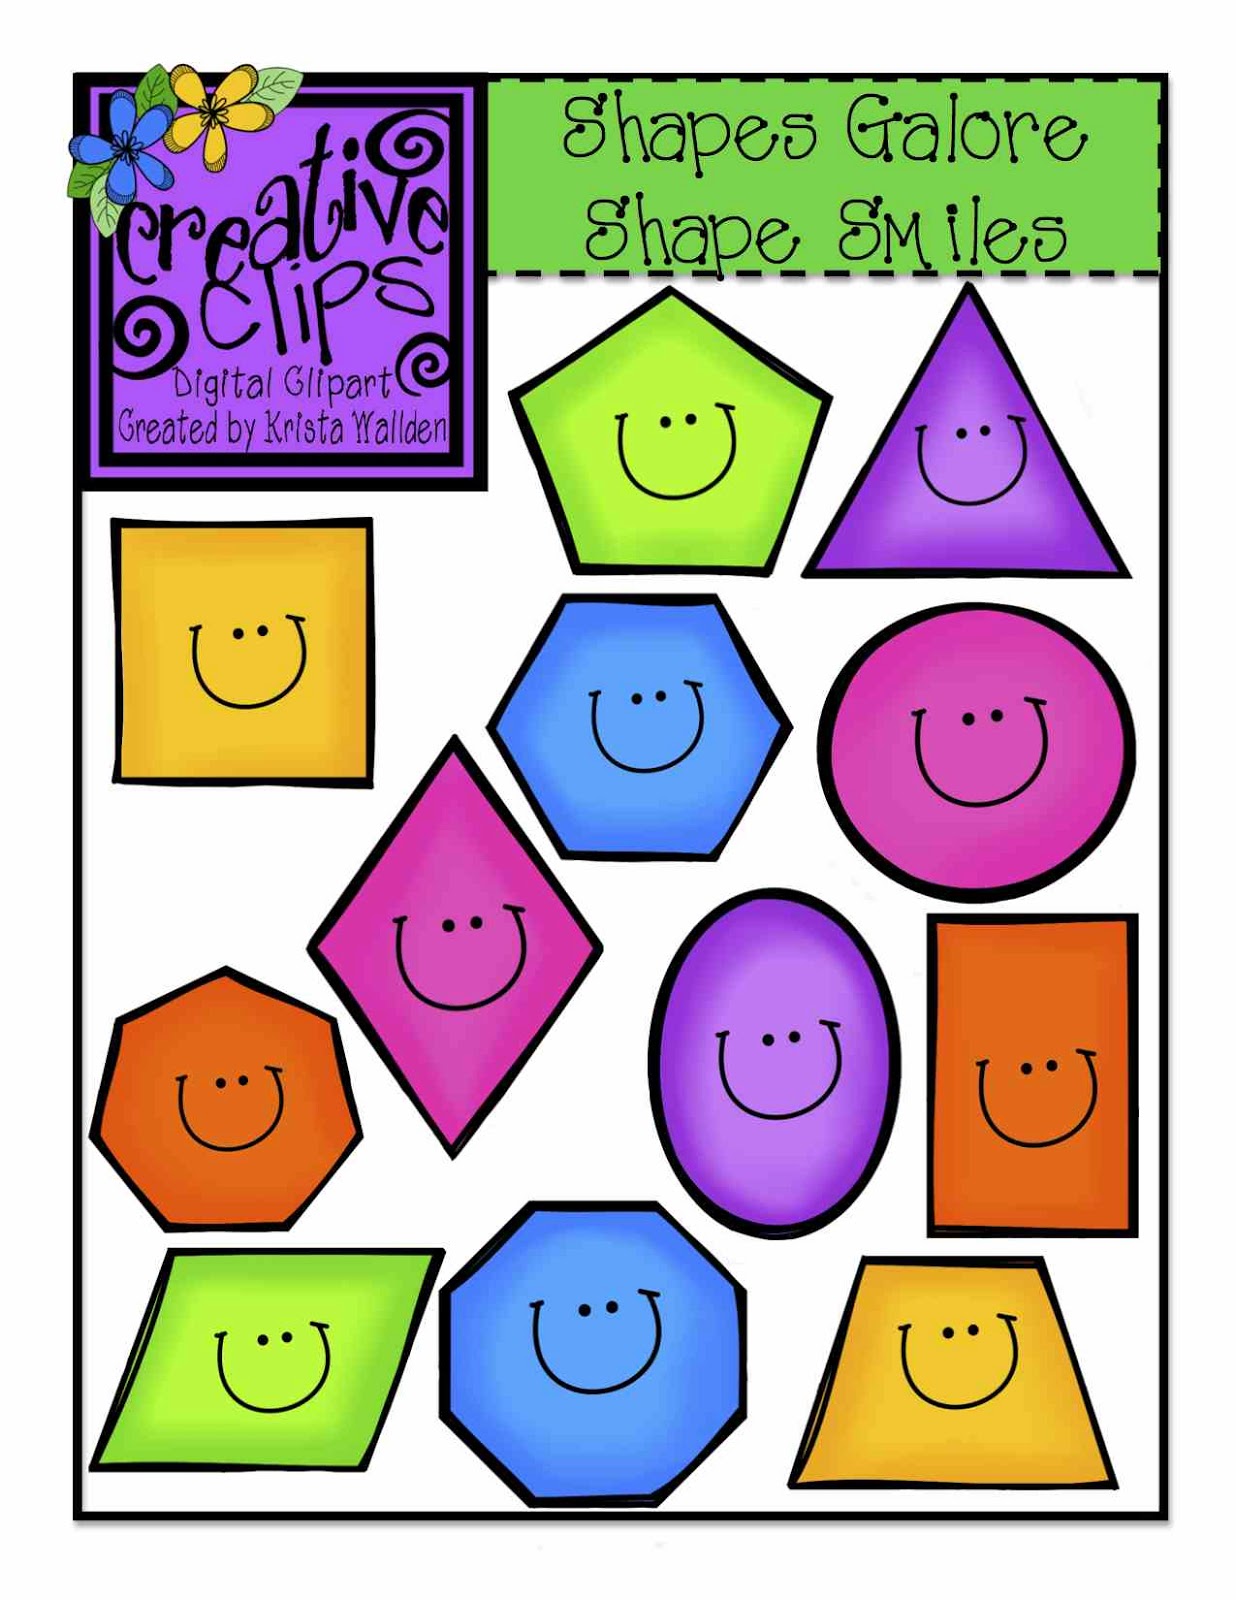 Free clipart shapes.